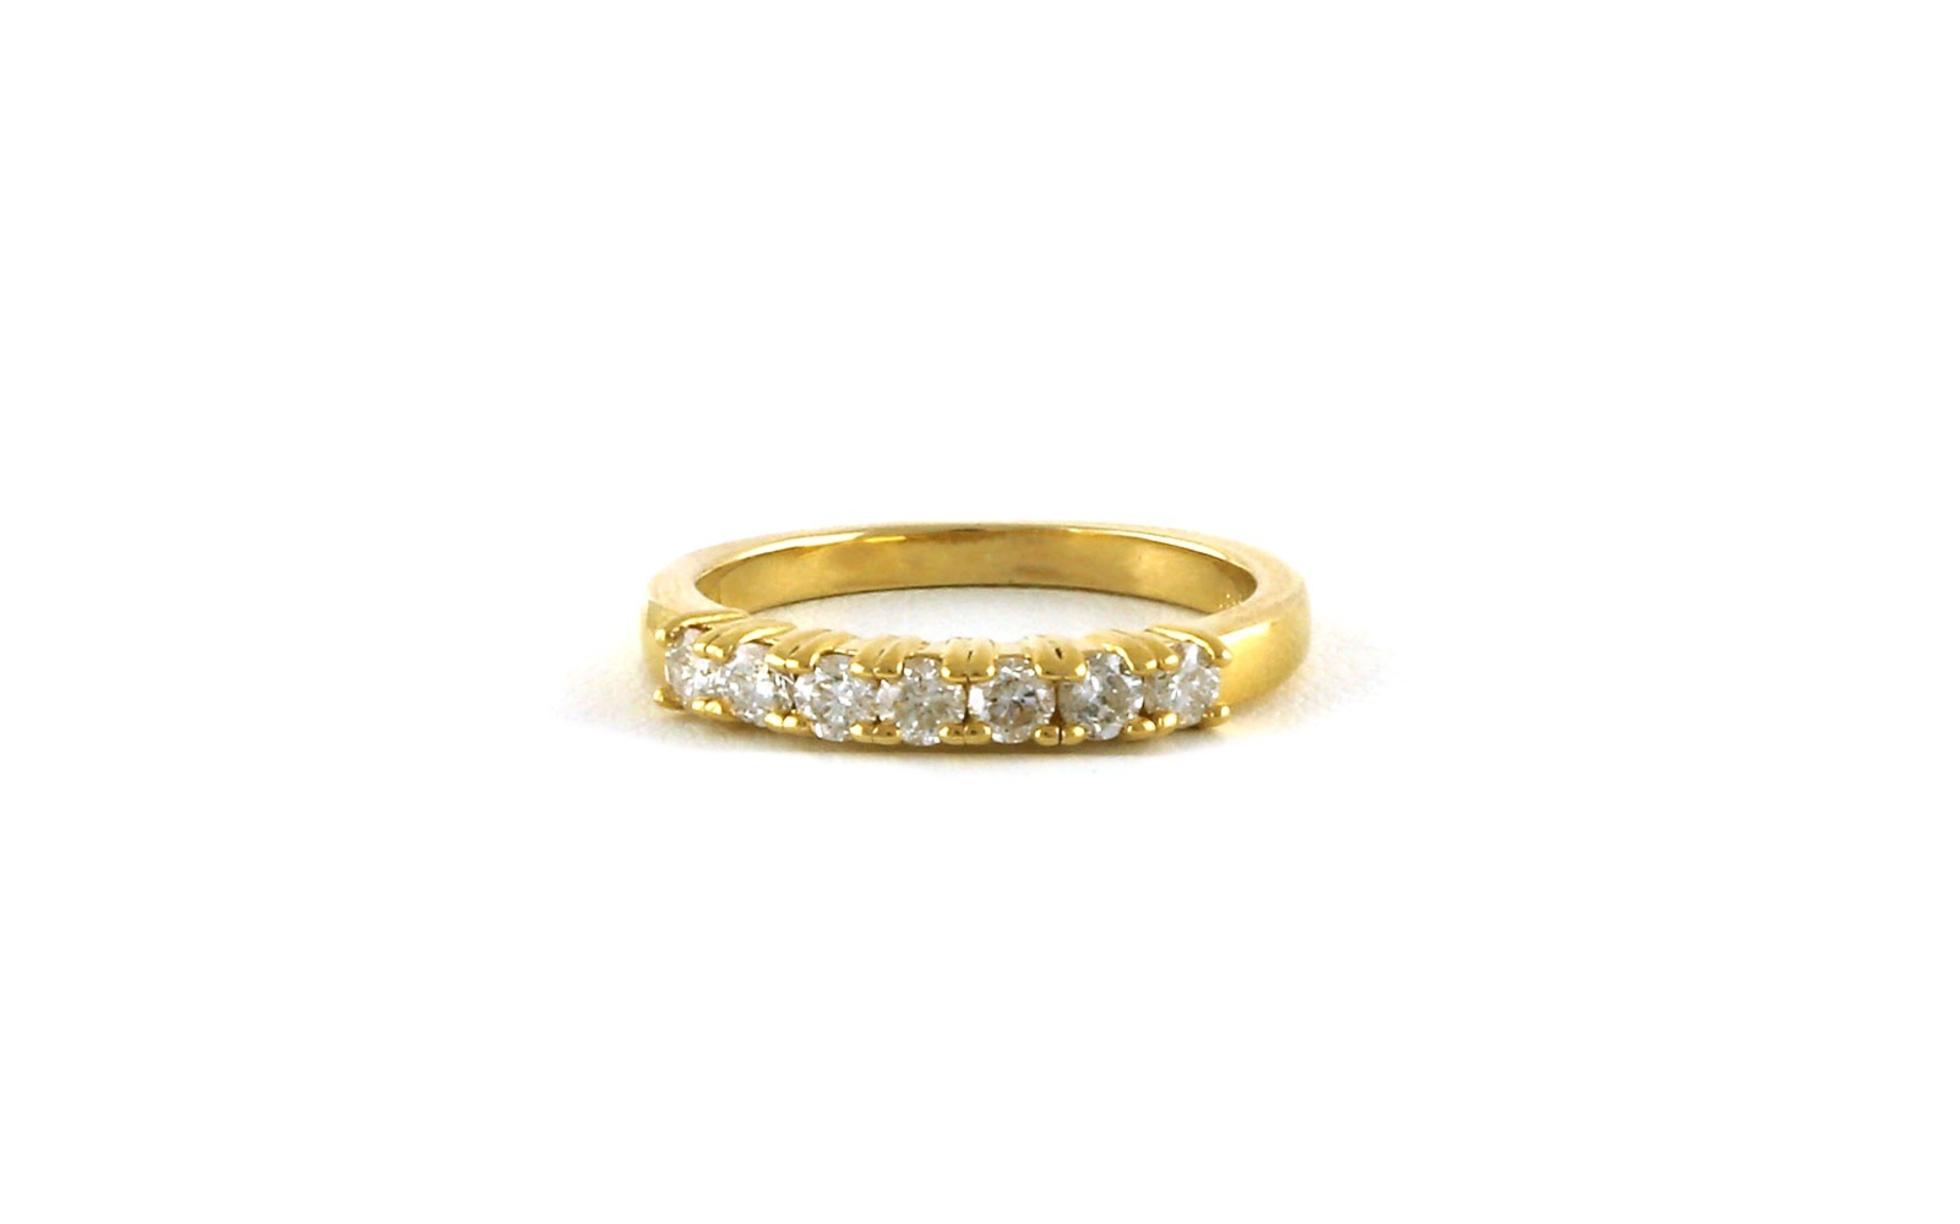 7-Stone Prong-set Diamond Wedding Band in Yellow Gold (0.50cts TWT)